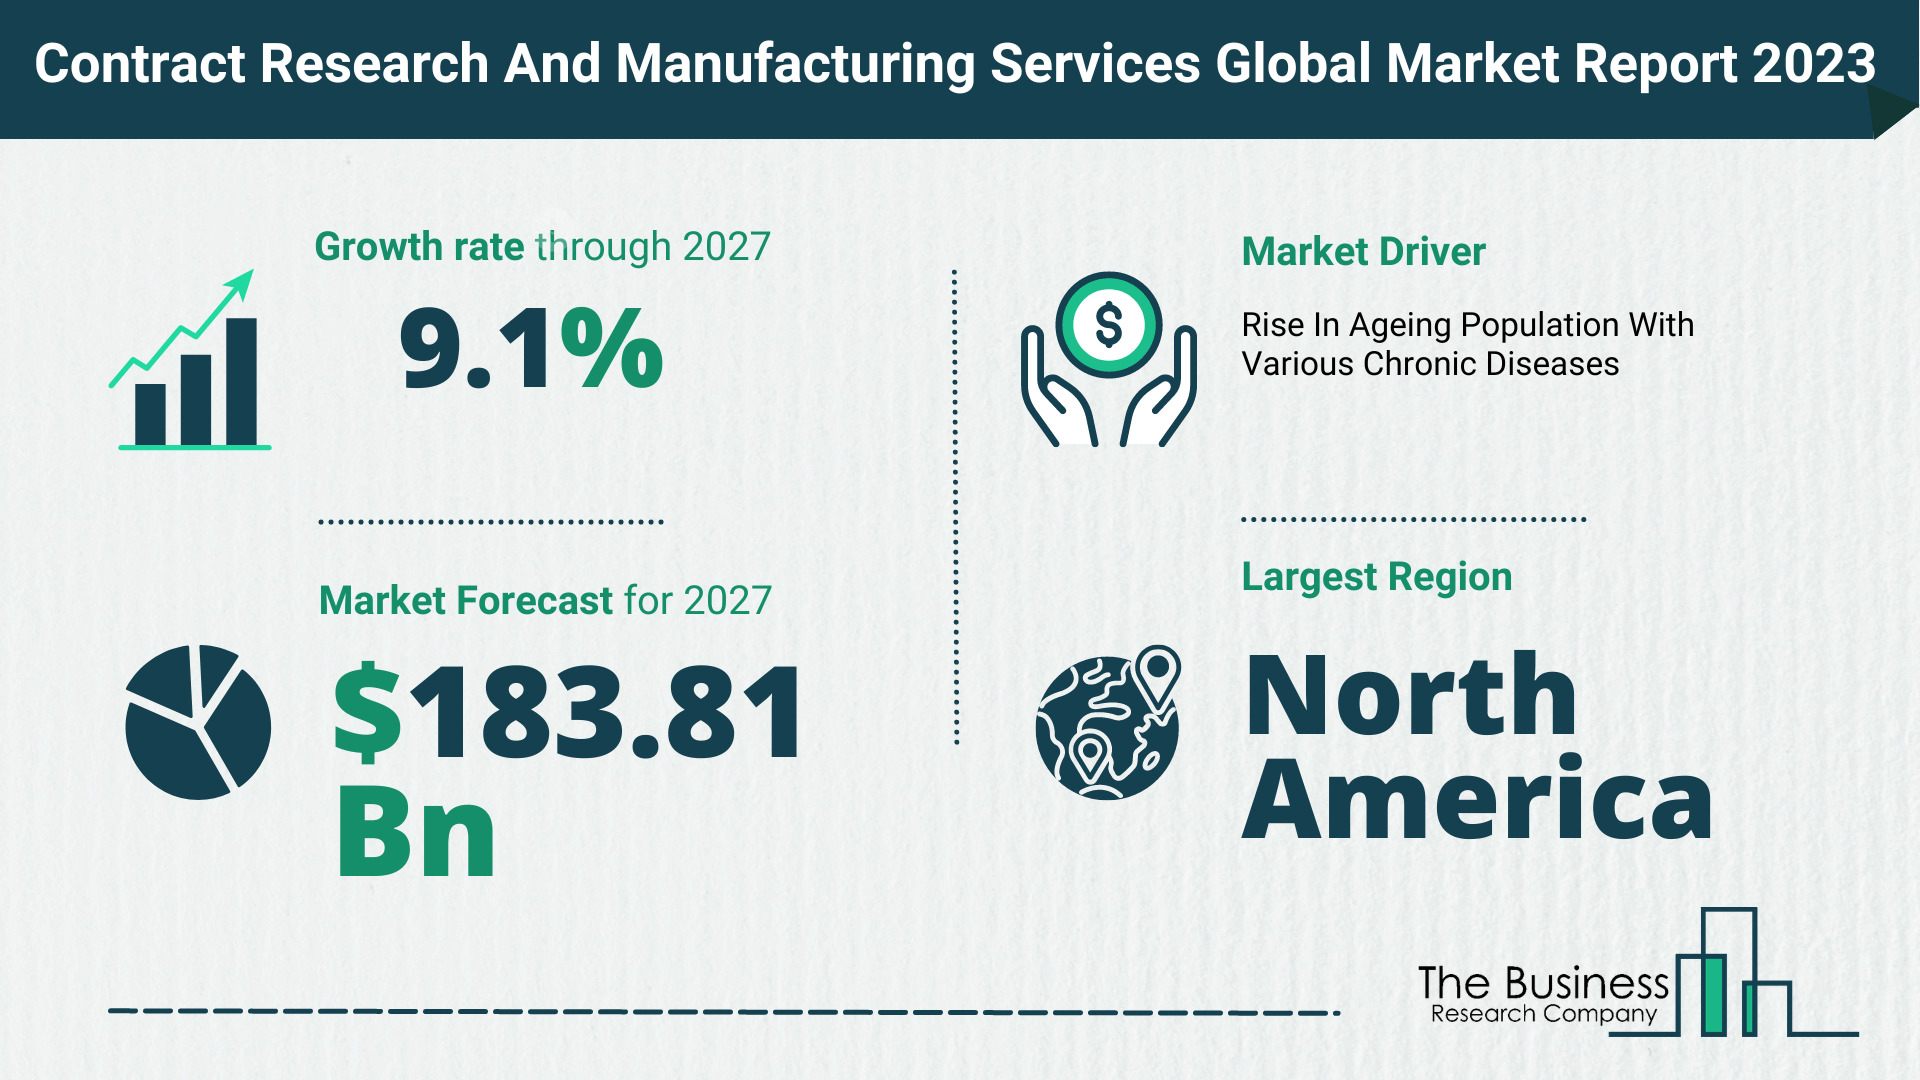 What Will The Contract Research And Manufacturing Services (CRAMS) Market Look Like In 2023?